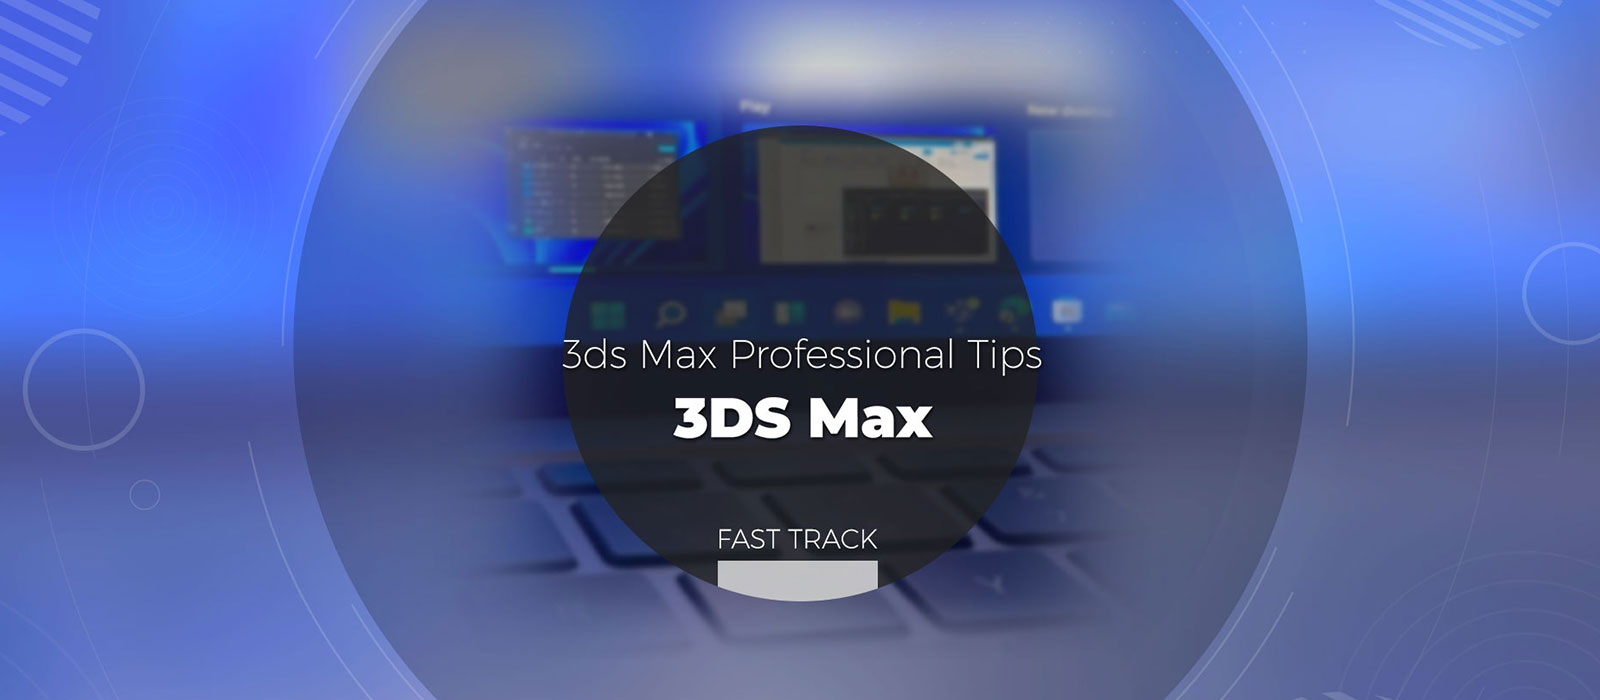 3DSMAX - 3ds Max Professional Tips